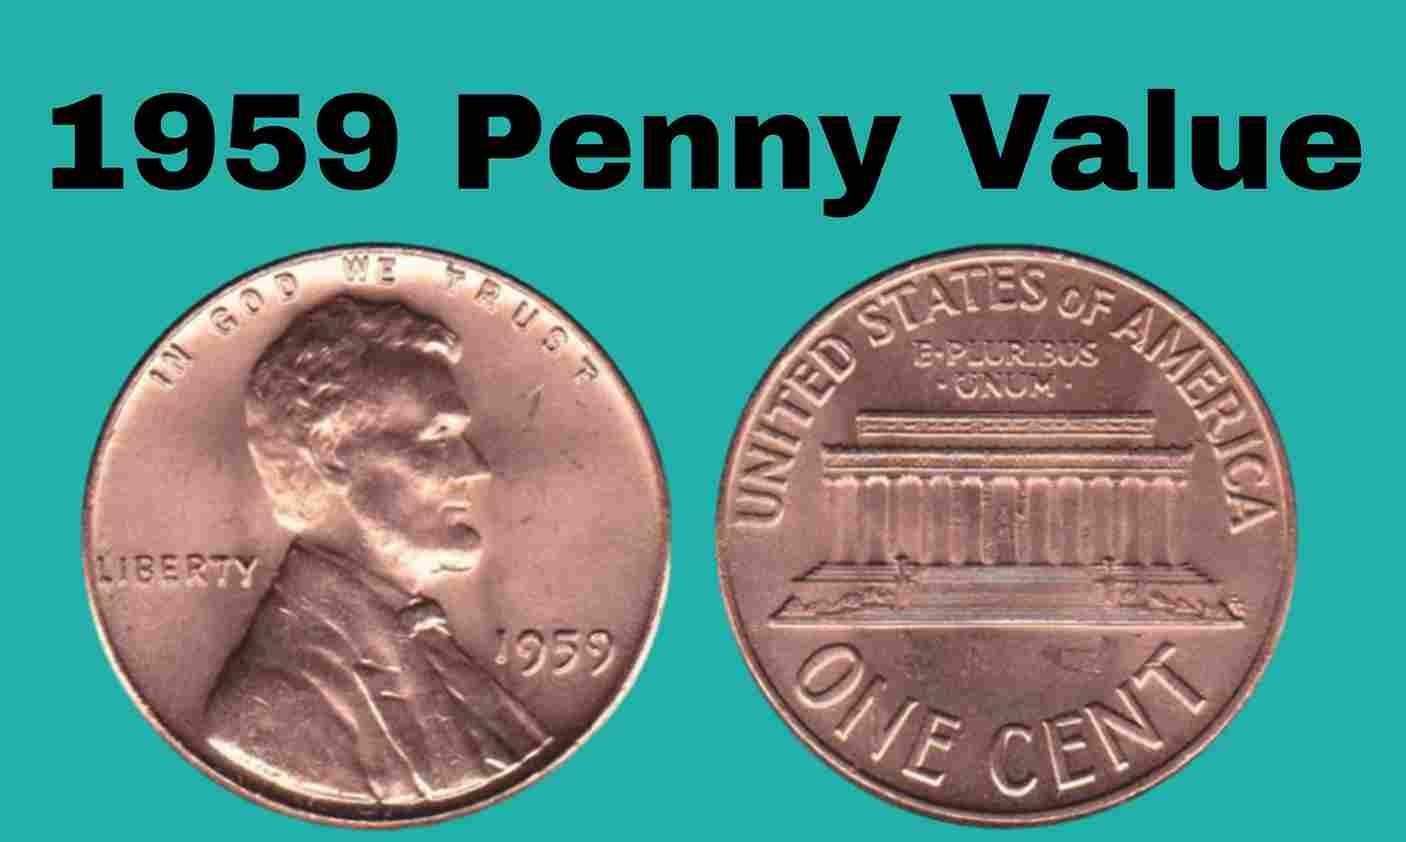 1959 penny value